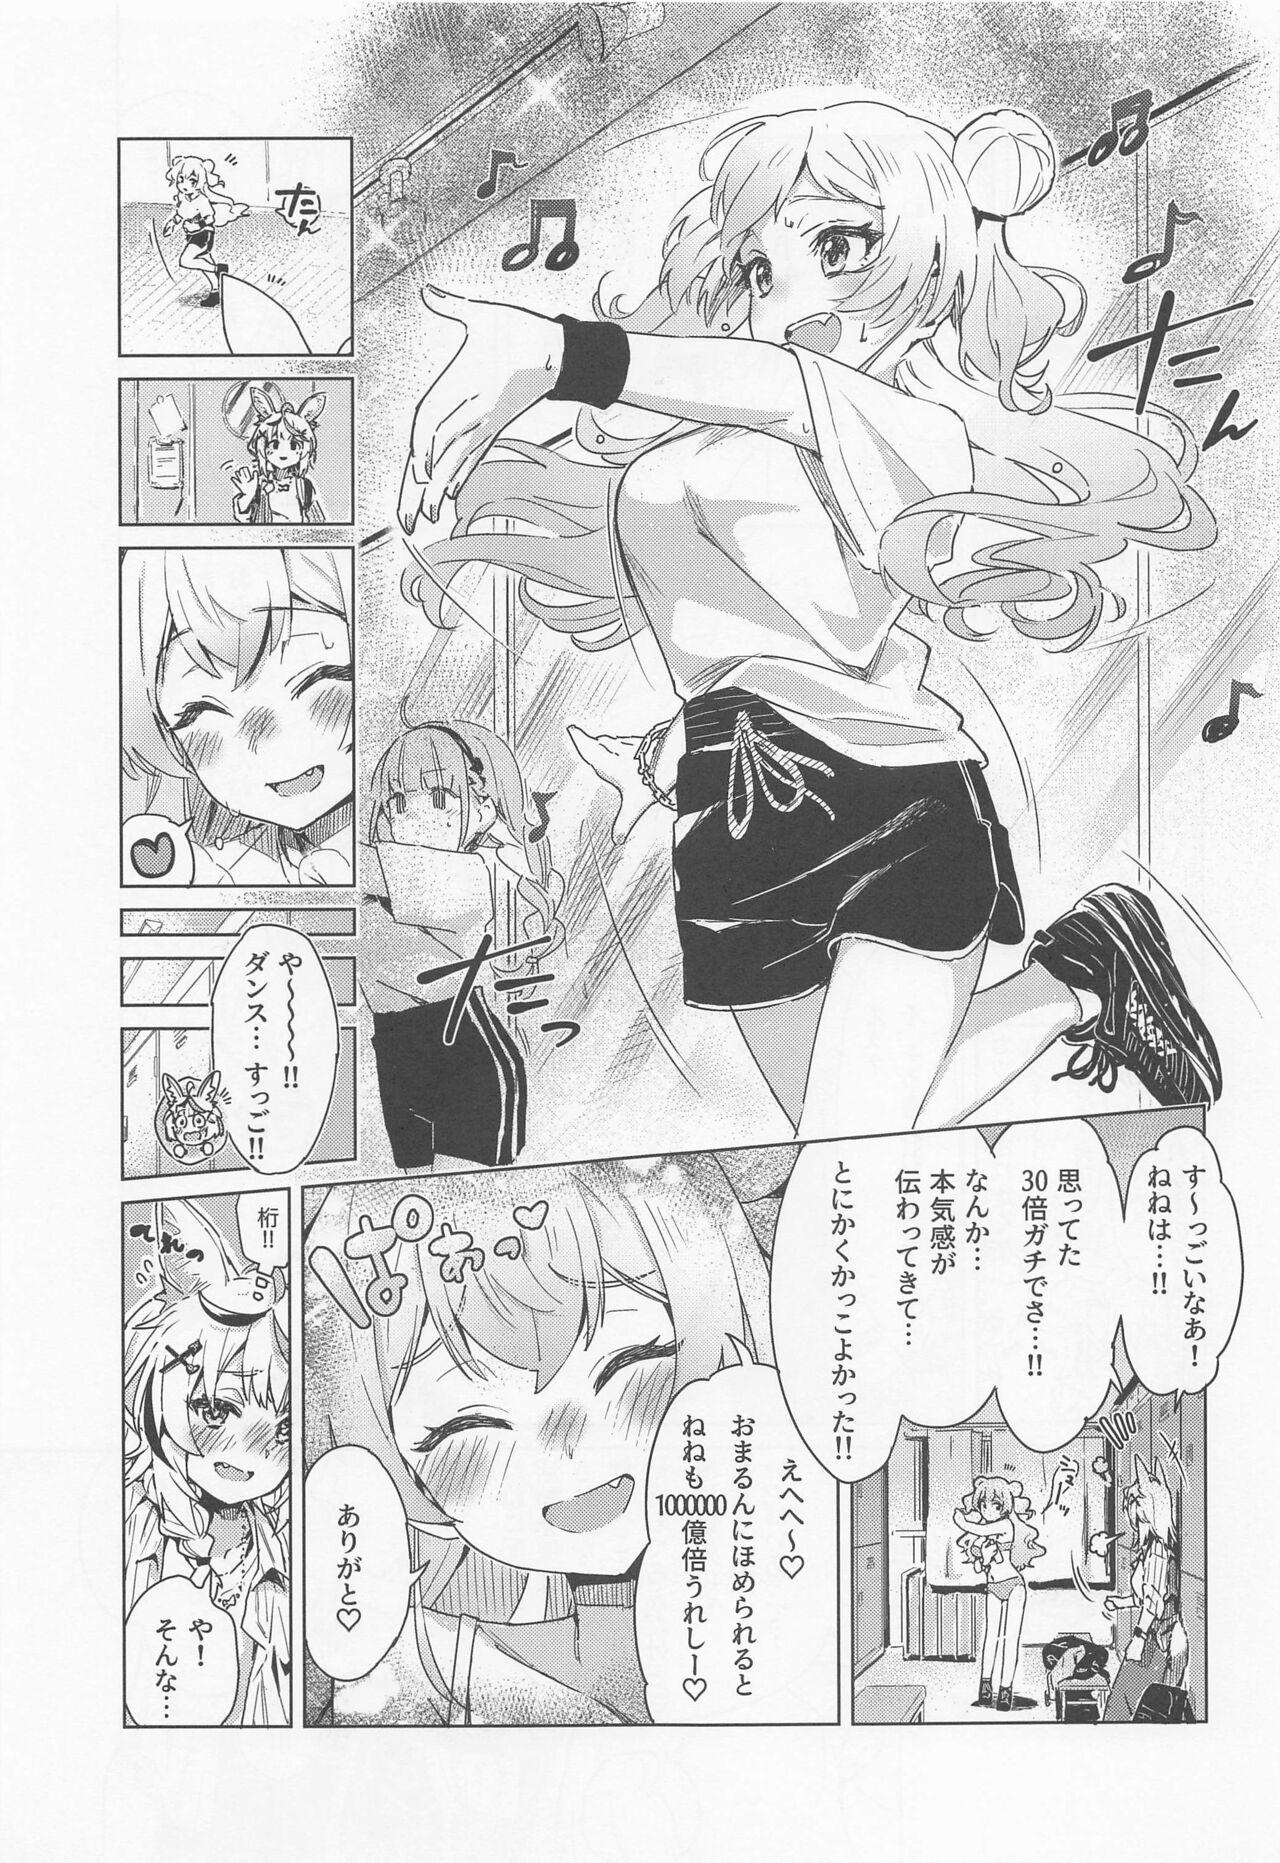 Dildos Fennec wa Iseijin no Yume o Miru ka - Does The Fennec Dream of The Lovely Visitor? - Hololive Gay - Page 6